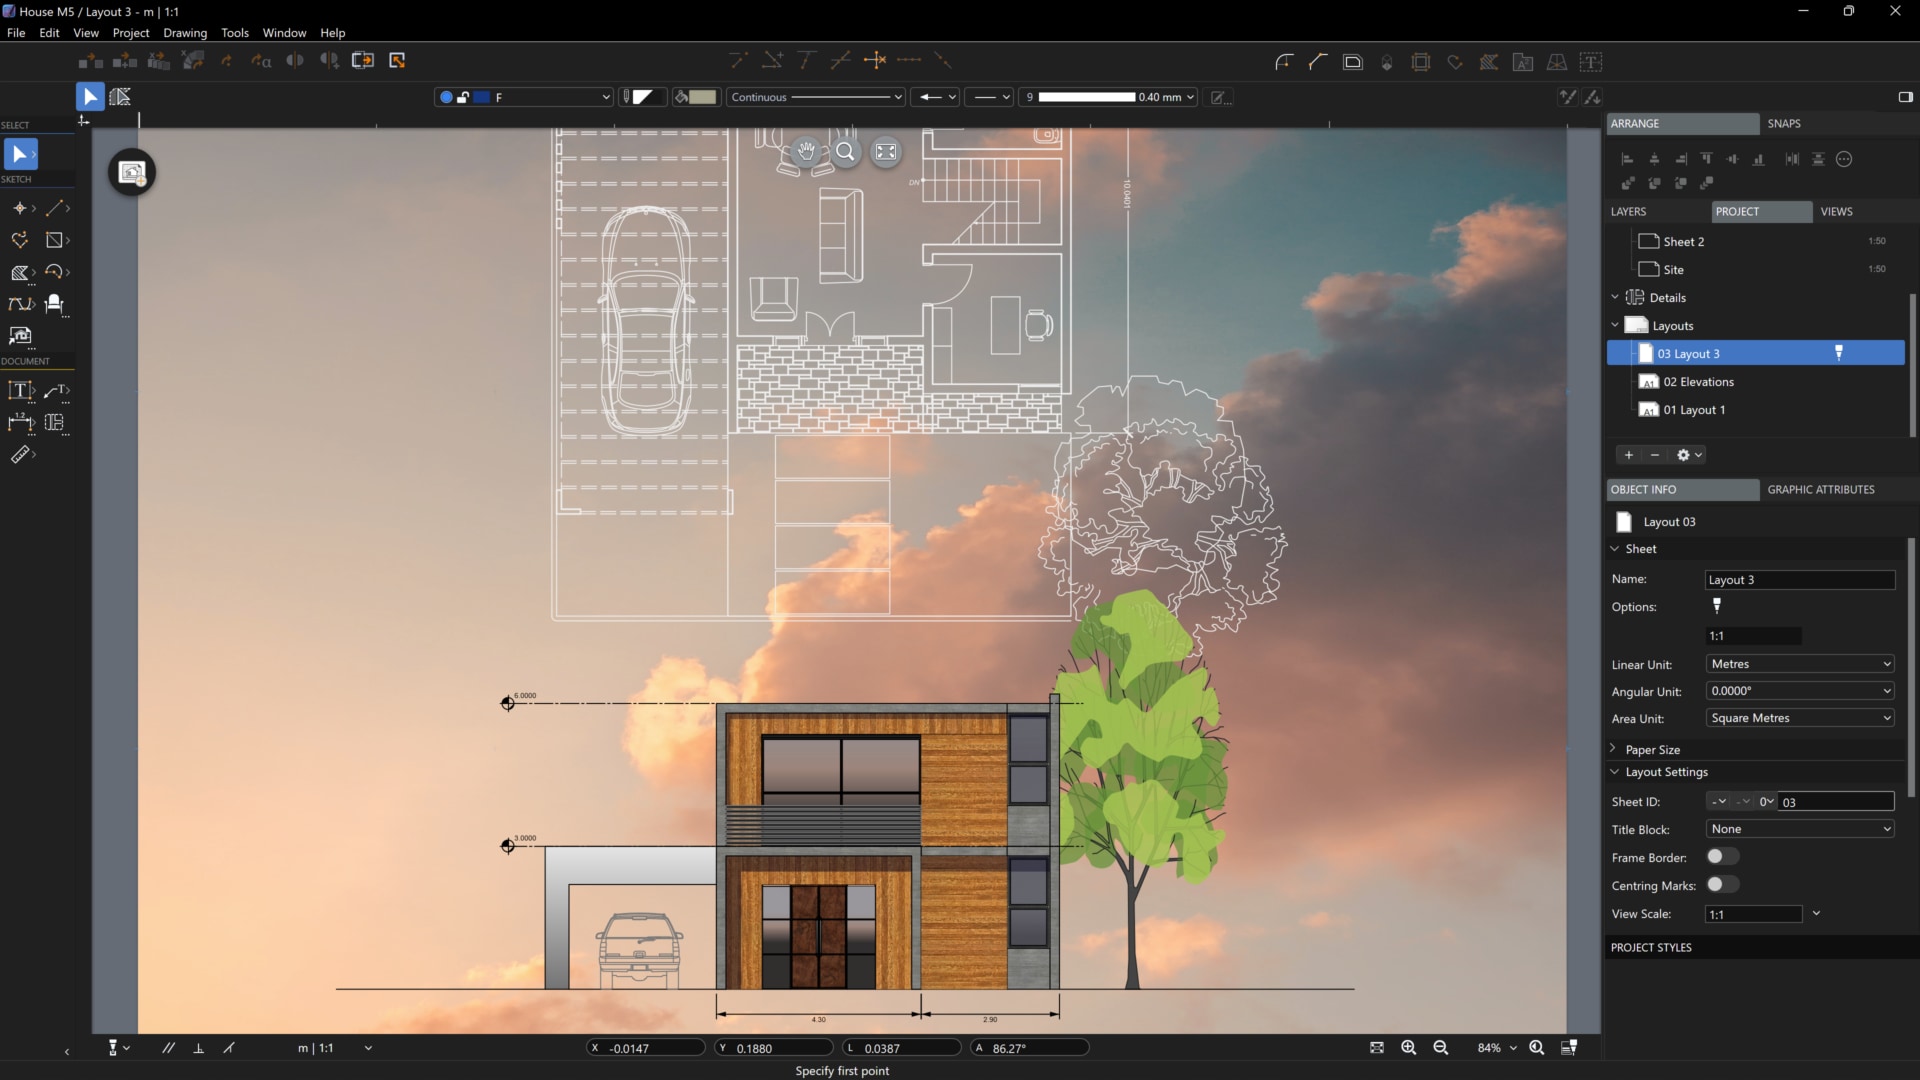 Developed specifically for the needs of architects, engineers, and design professionals, HighDesign is the full-featured, fast CAD and architectural design solution to create precise drawings, projects, layouts, and work with DWG drawings.